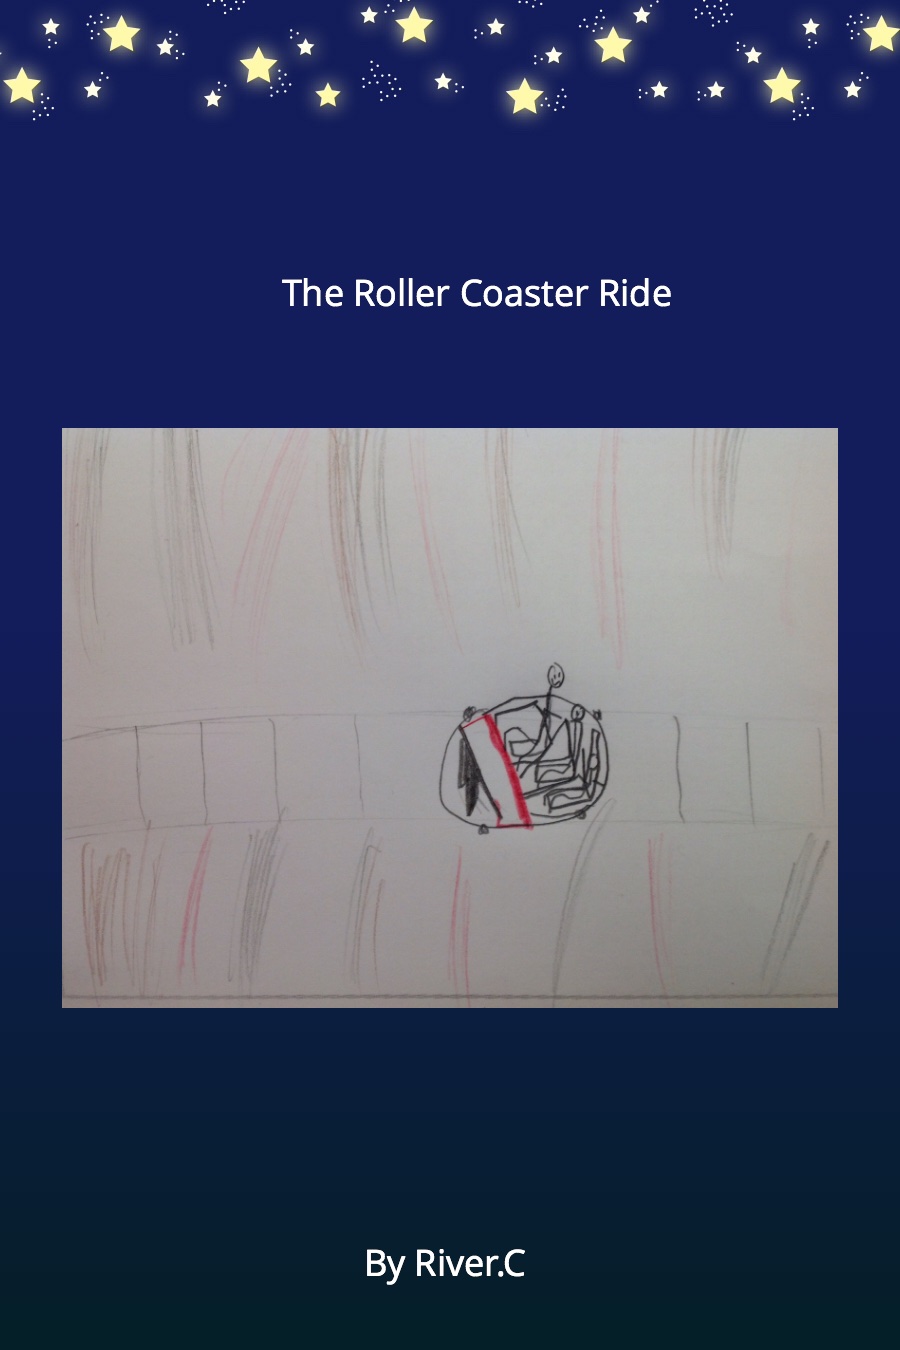 The Roller Coaster Ride by River C